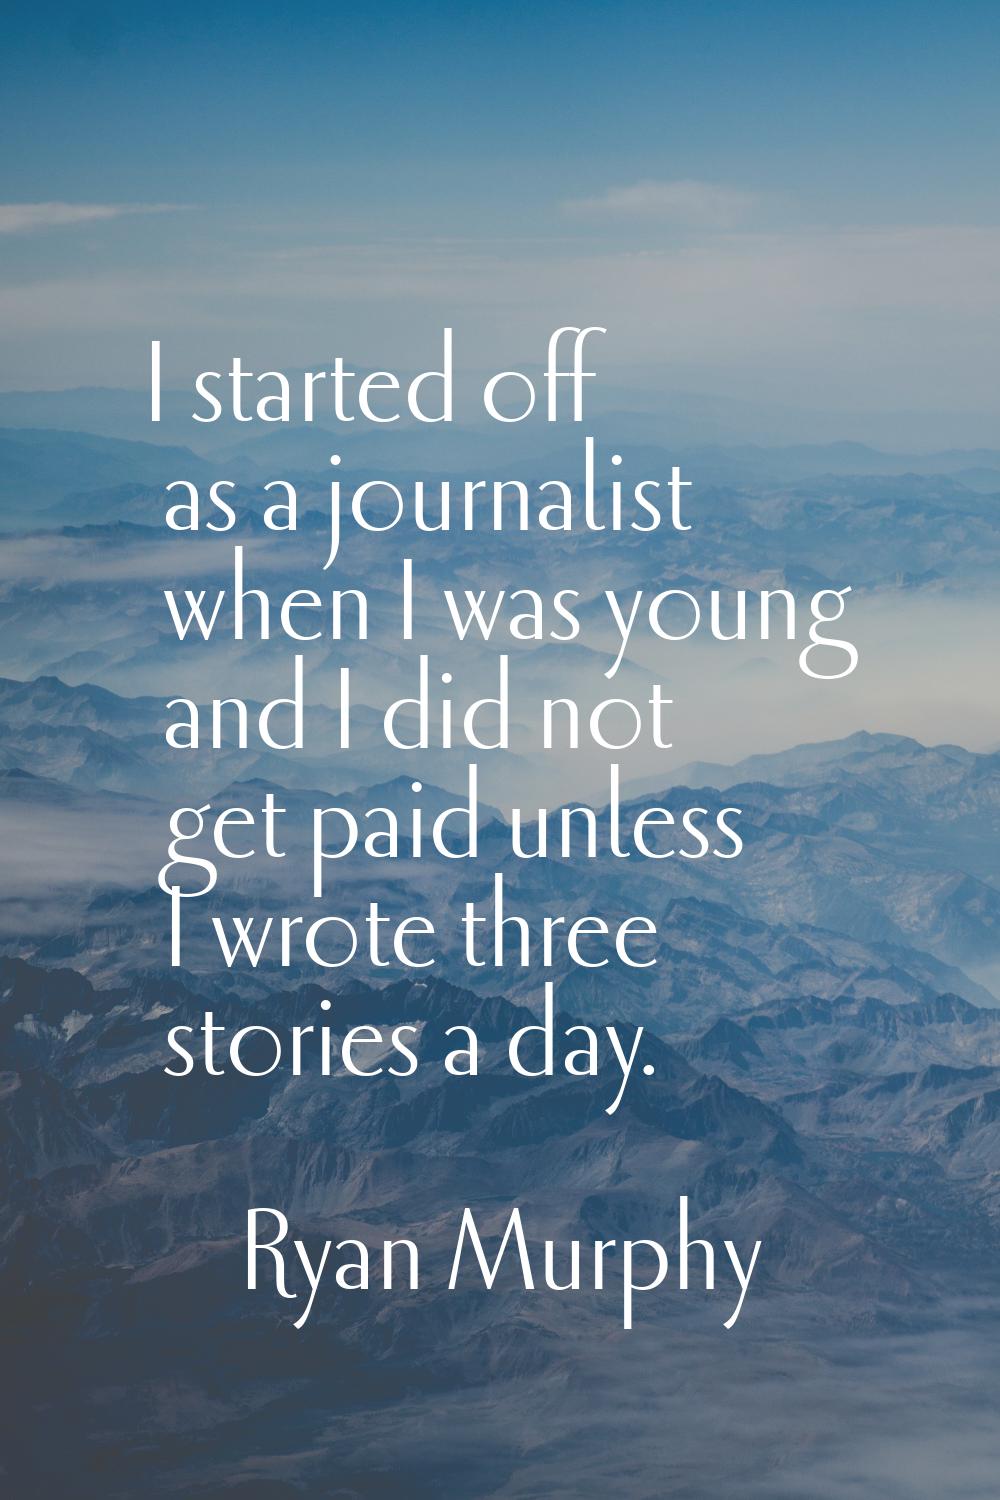 I started off as a journalist when I was young and I did not get paid unless I wrote three stories 